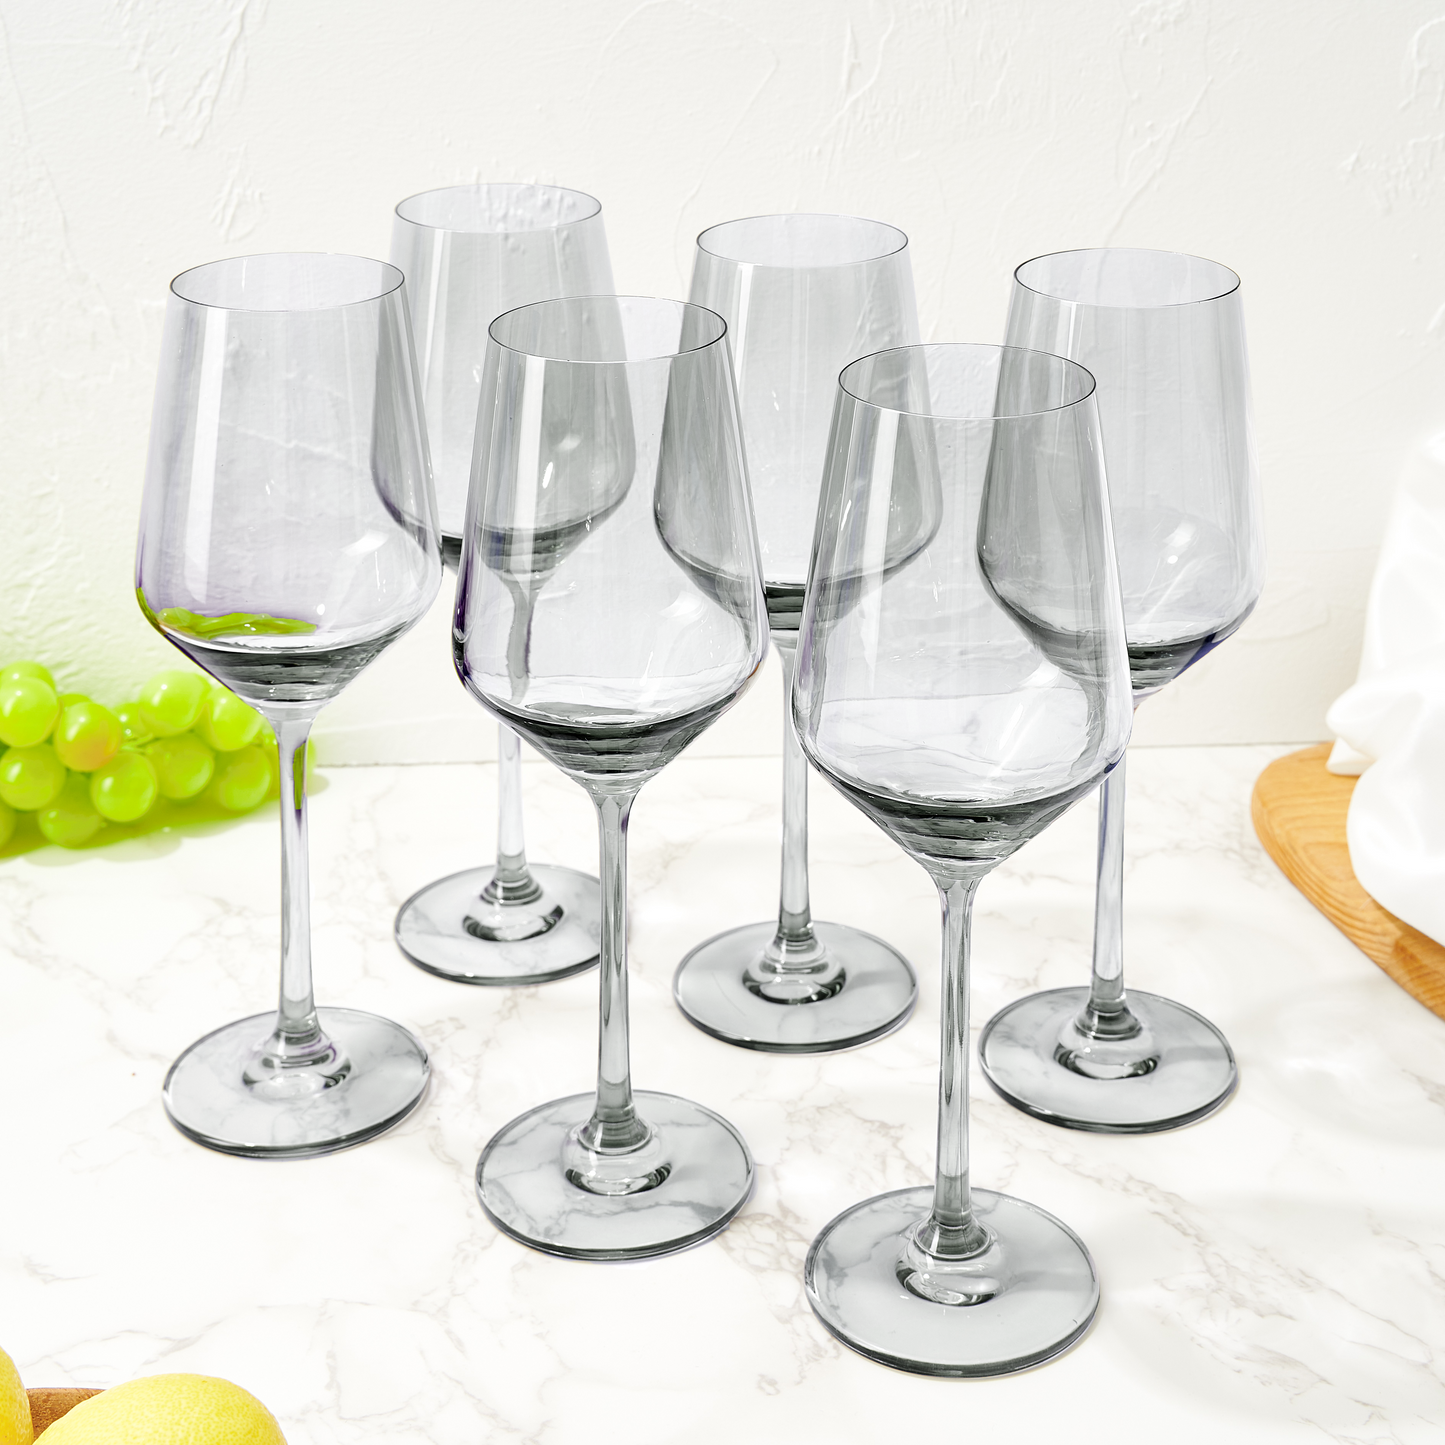 Colored Wine Glass Set, 12oz Glasses Set of 6 Baby Shower Gender Reveal Boy or Girl Decor Baby Announcement Unique Italian Style Tall Stemmed for White & Red Wine Elegant Glassware (Smoke Grey)-1